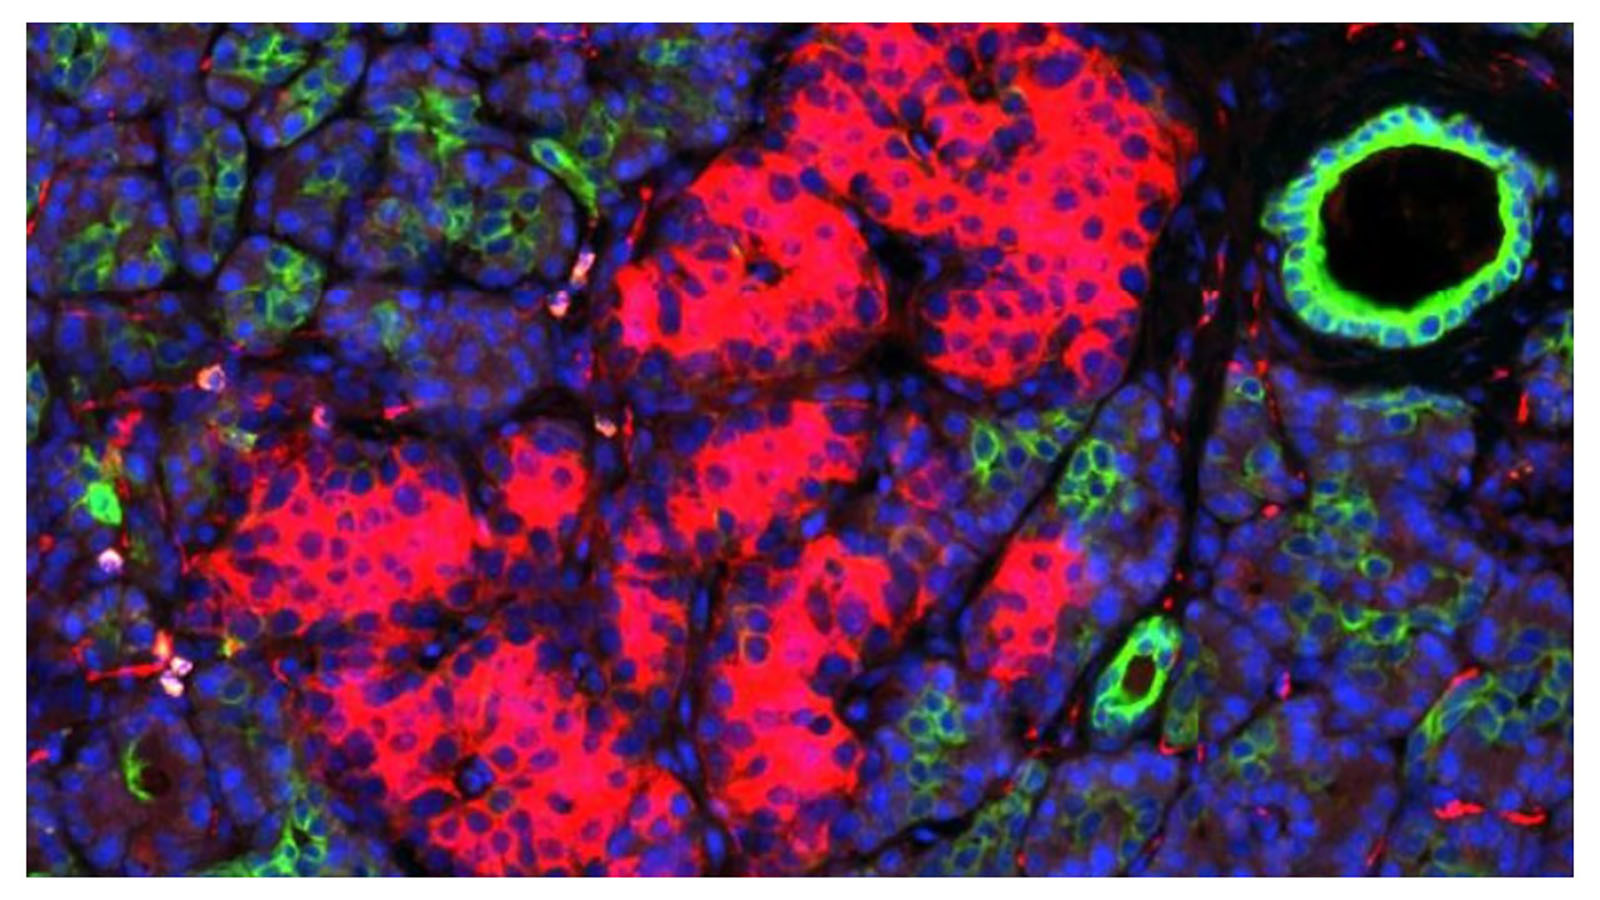 Nanostring GeoMX transcriptome image of human pancreas from Dr. Martha Campbell-Thomson at University of Florida